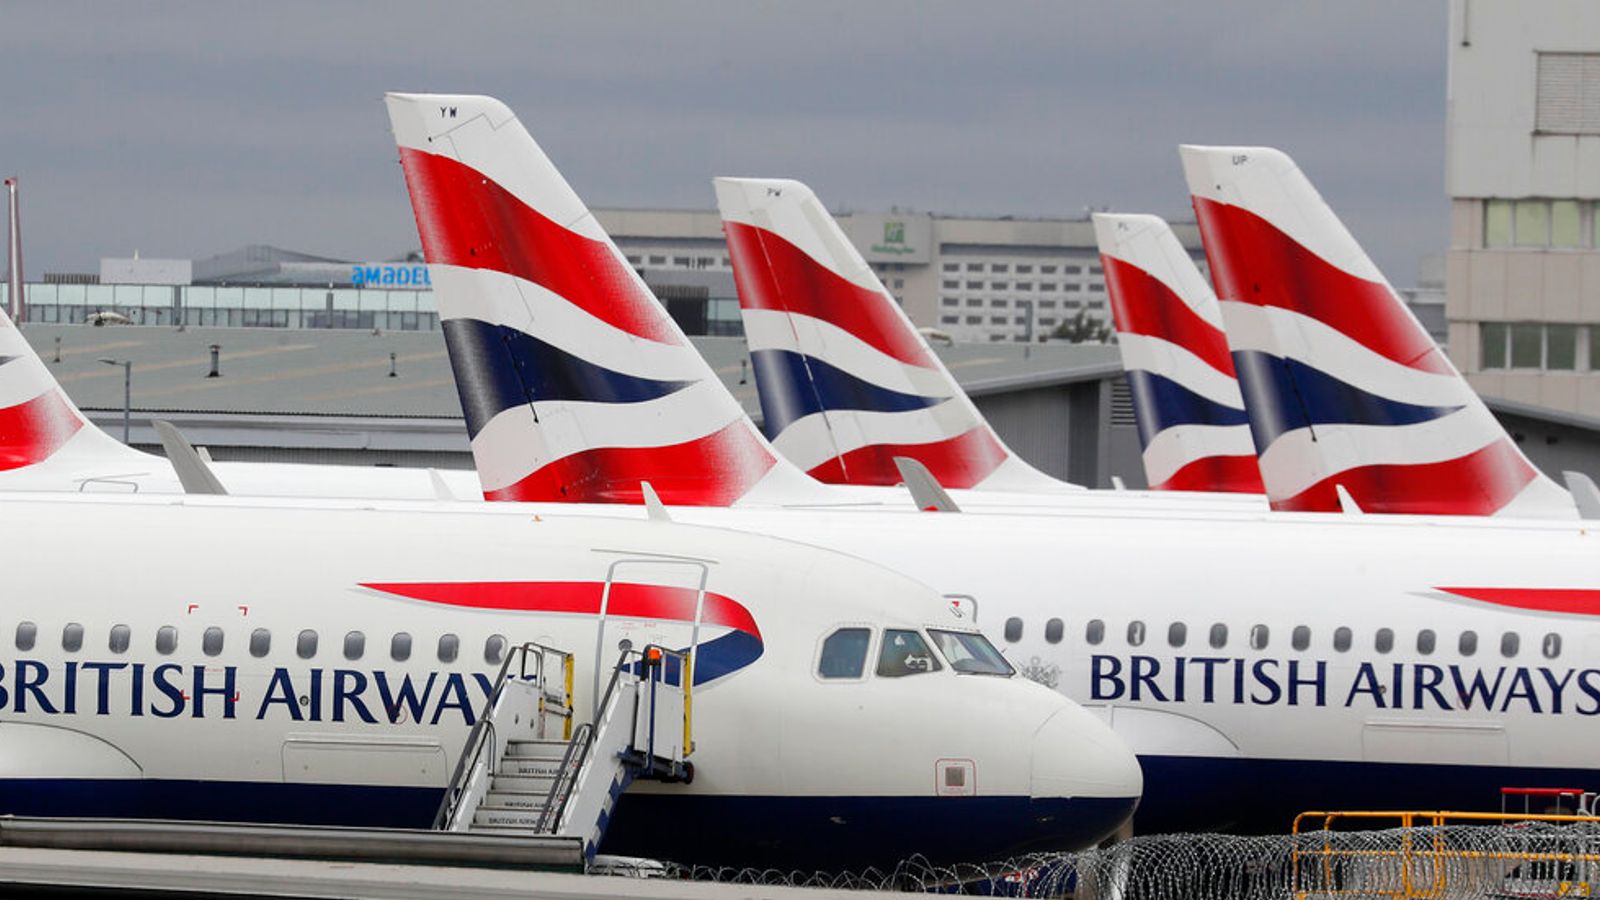 British Airways Cancels Dozens of Flights from Heathrow, Leaving Thousands Stranded